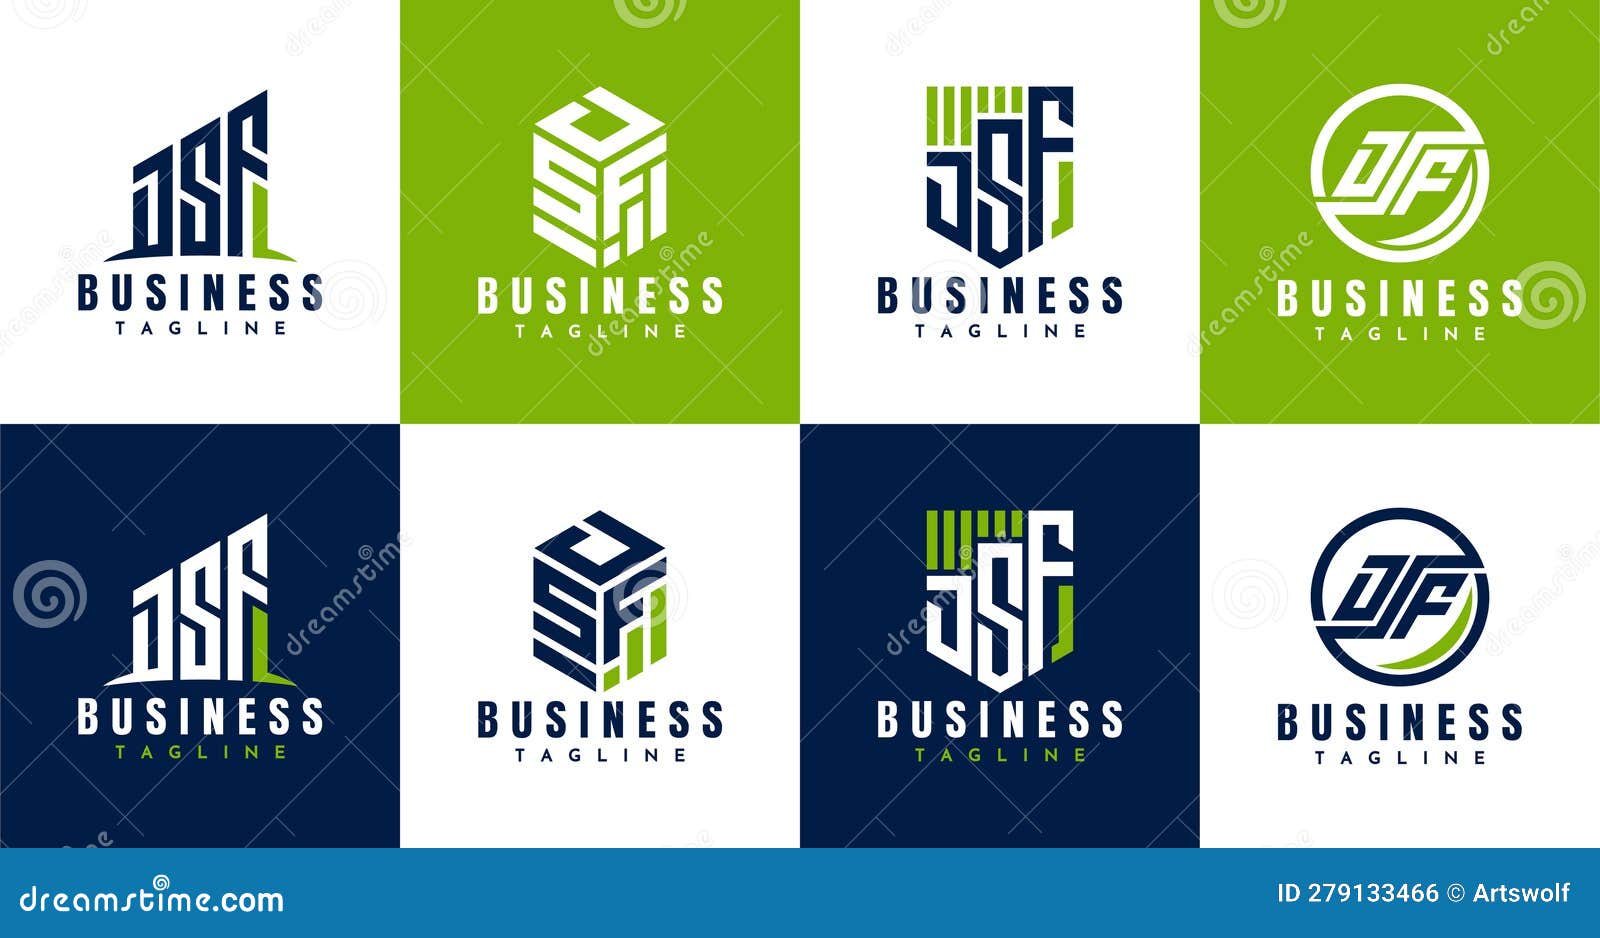 Dfs Logo Stock Photos - Free & Royalty-Free Stock Photos from Dreamstime